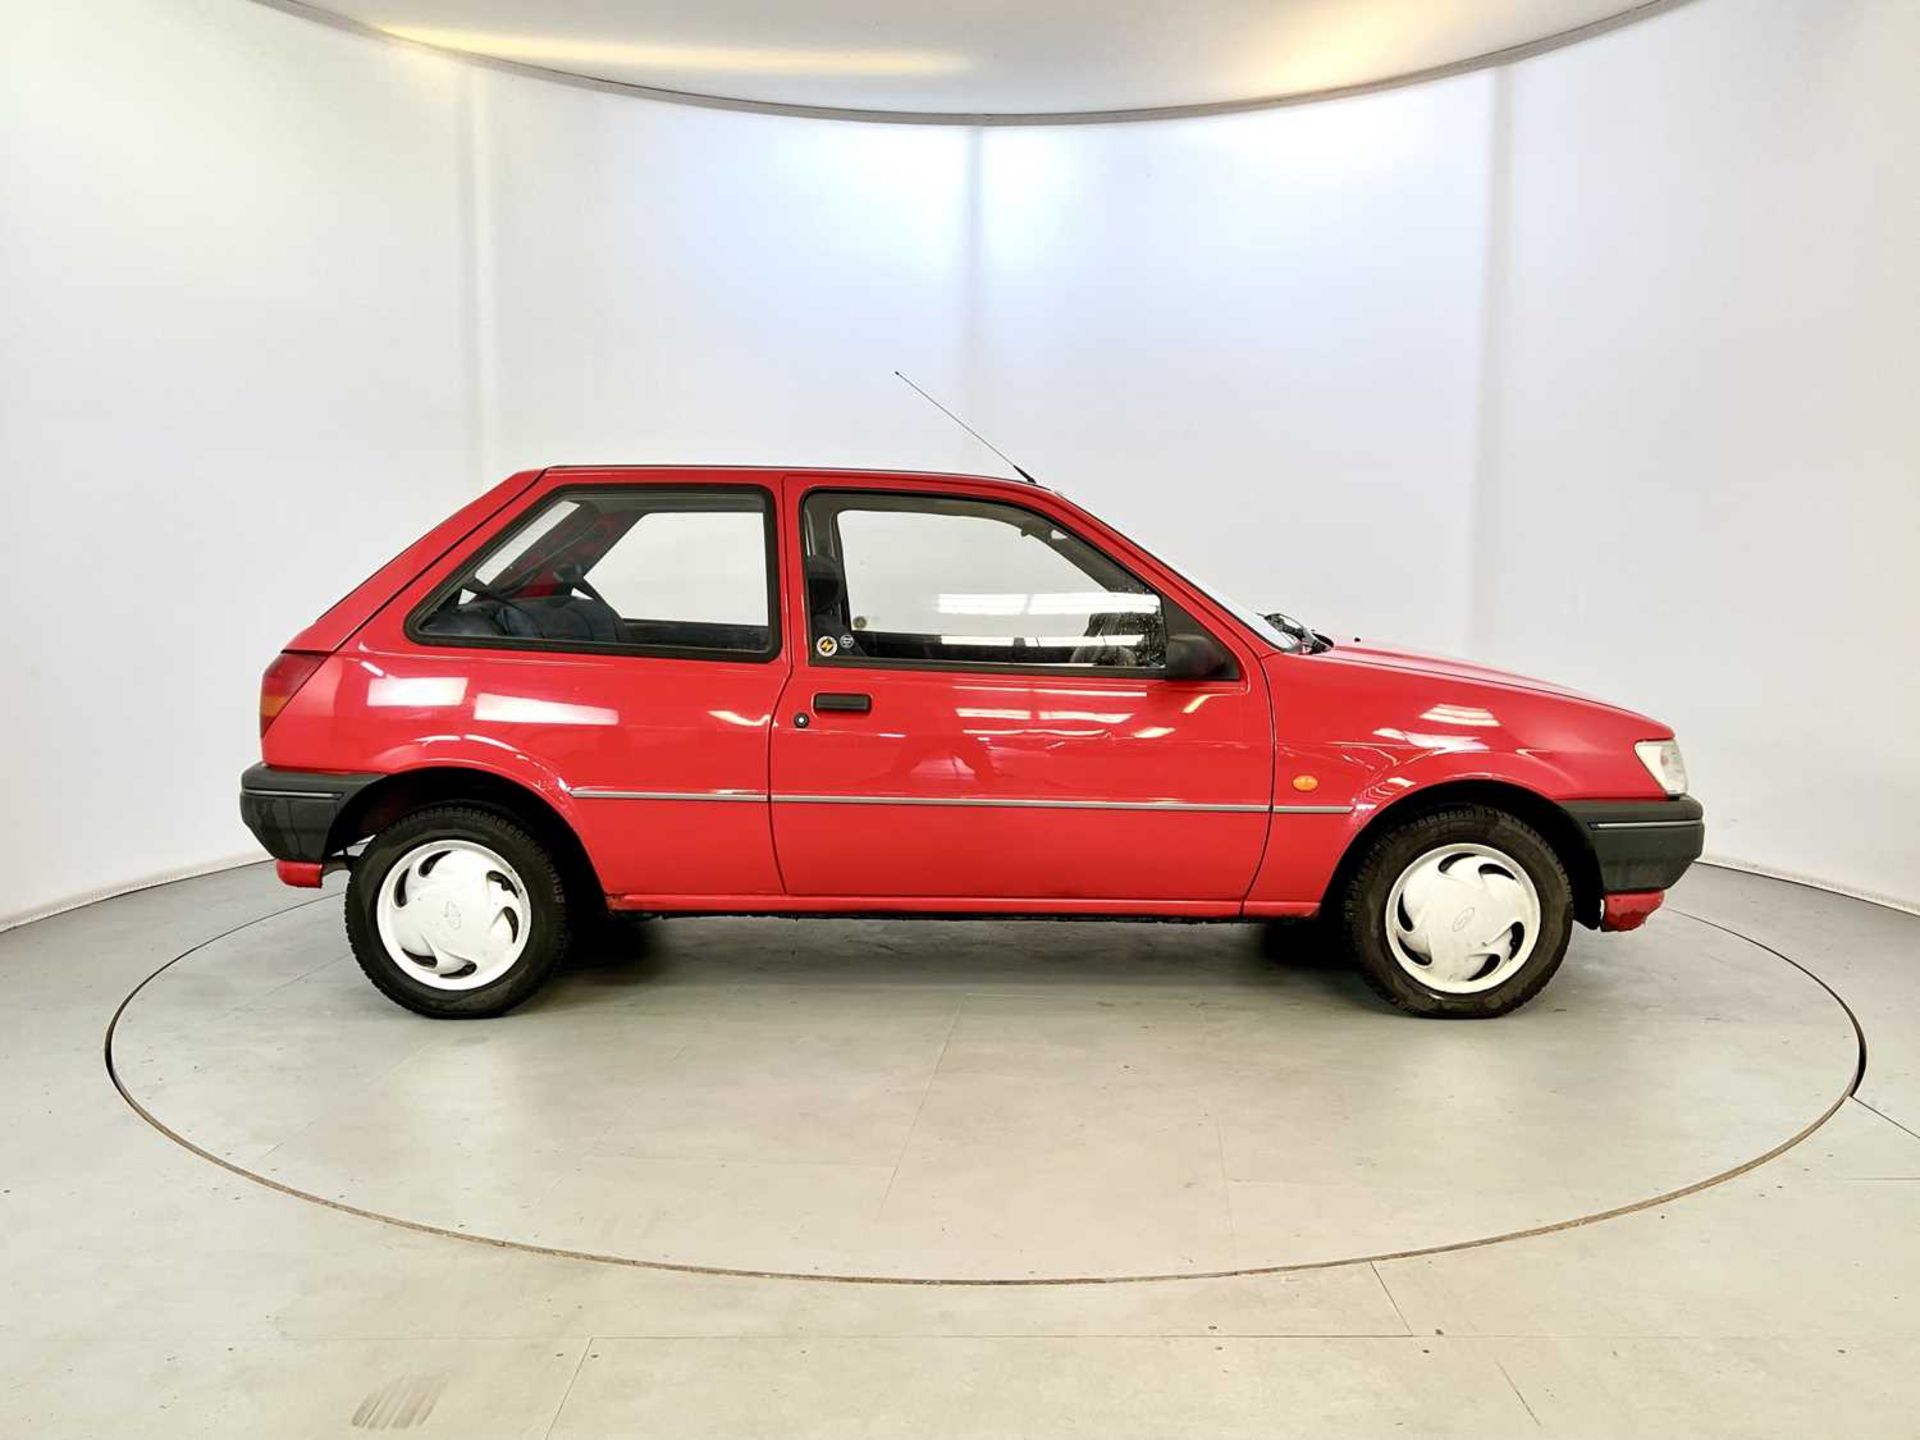 1994 Ford Fiesta Sapphire - Image 11 of 27